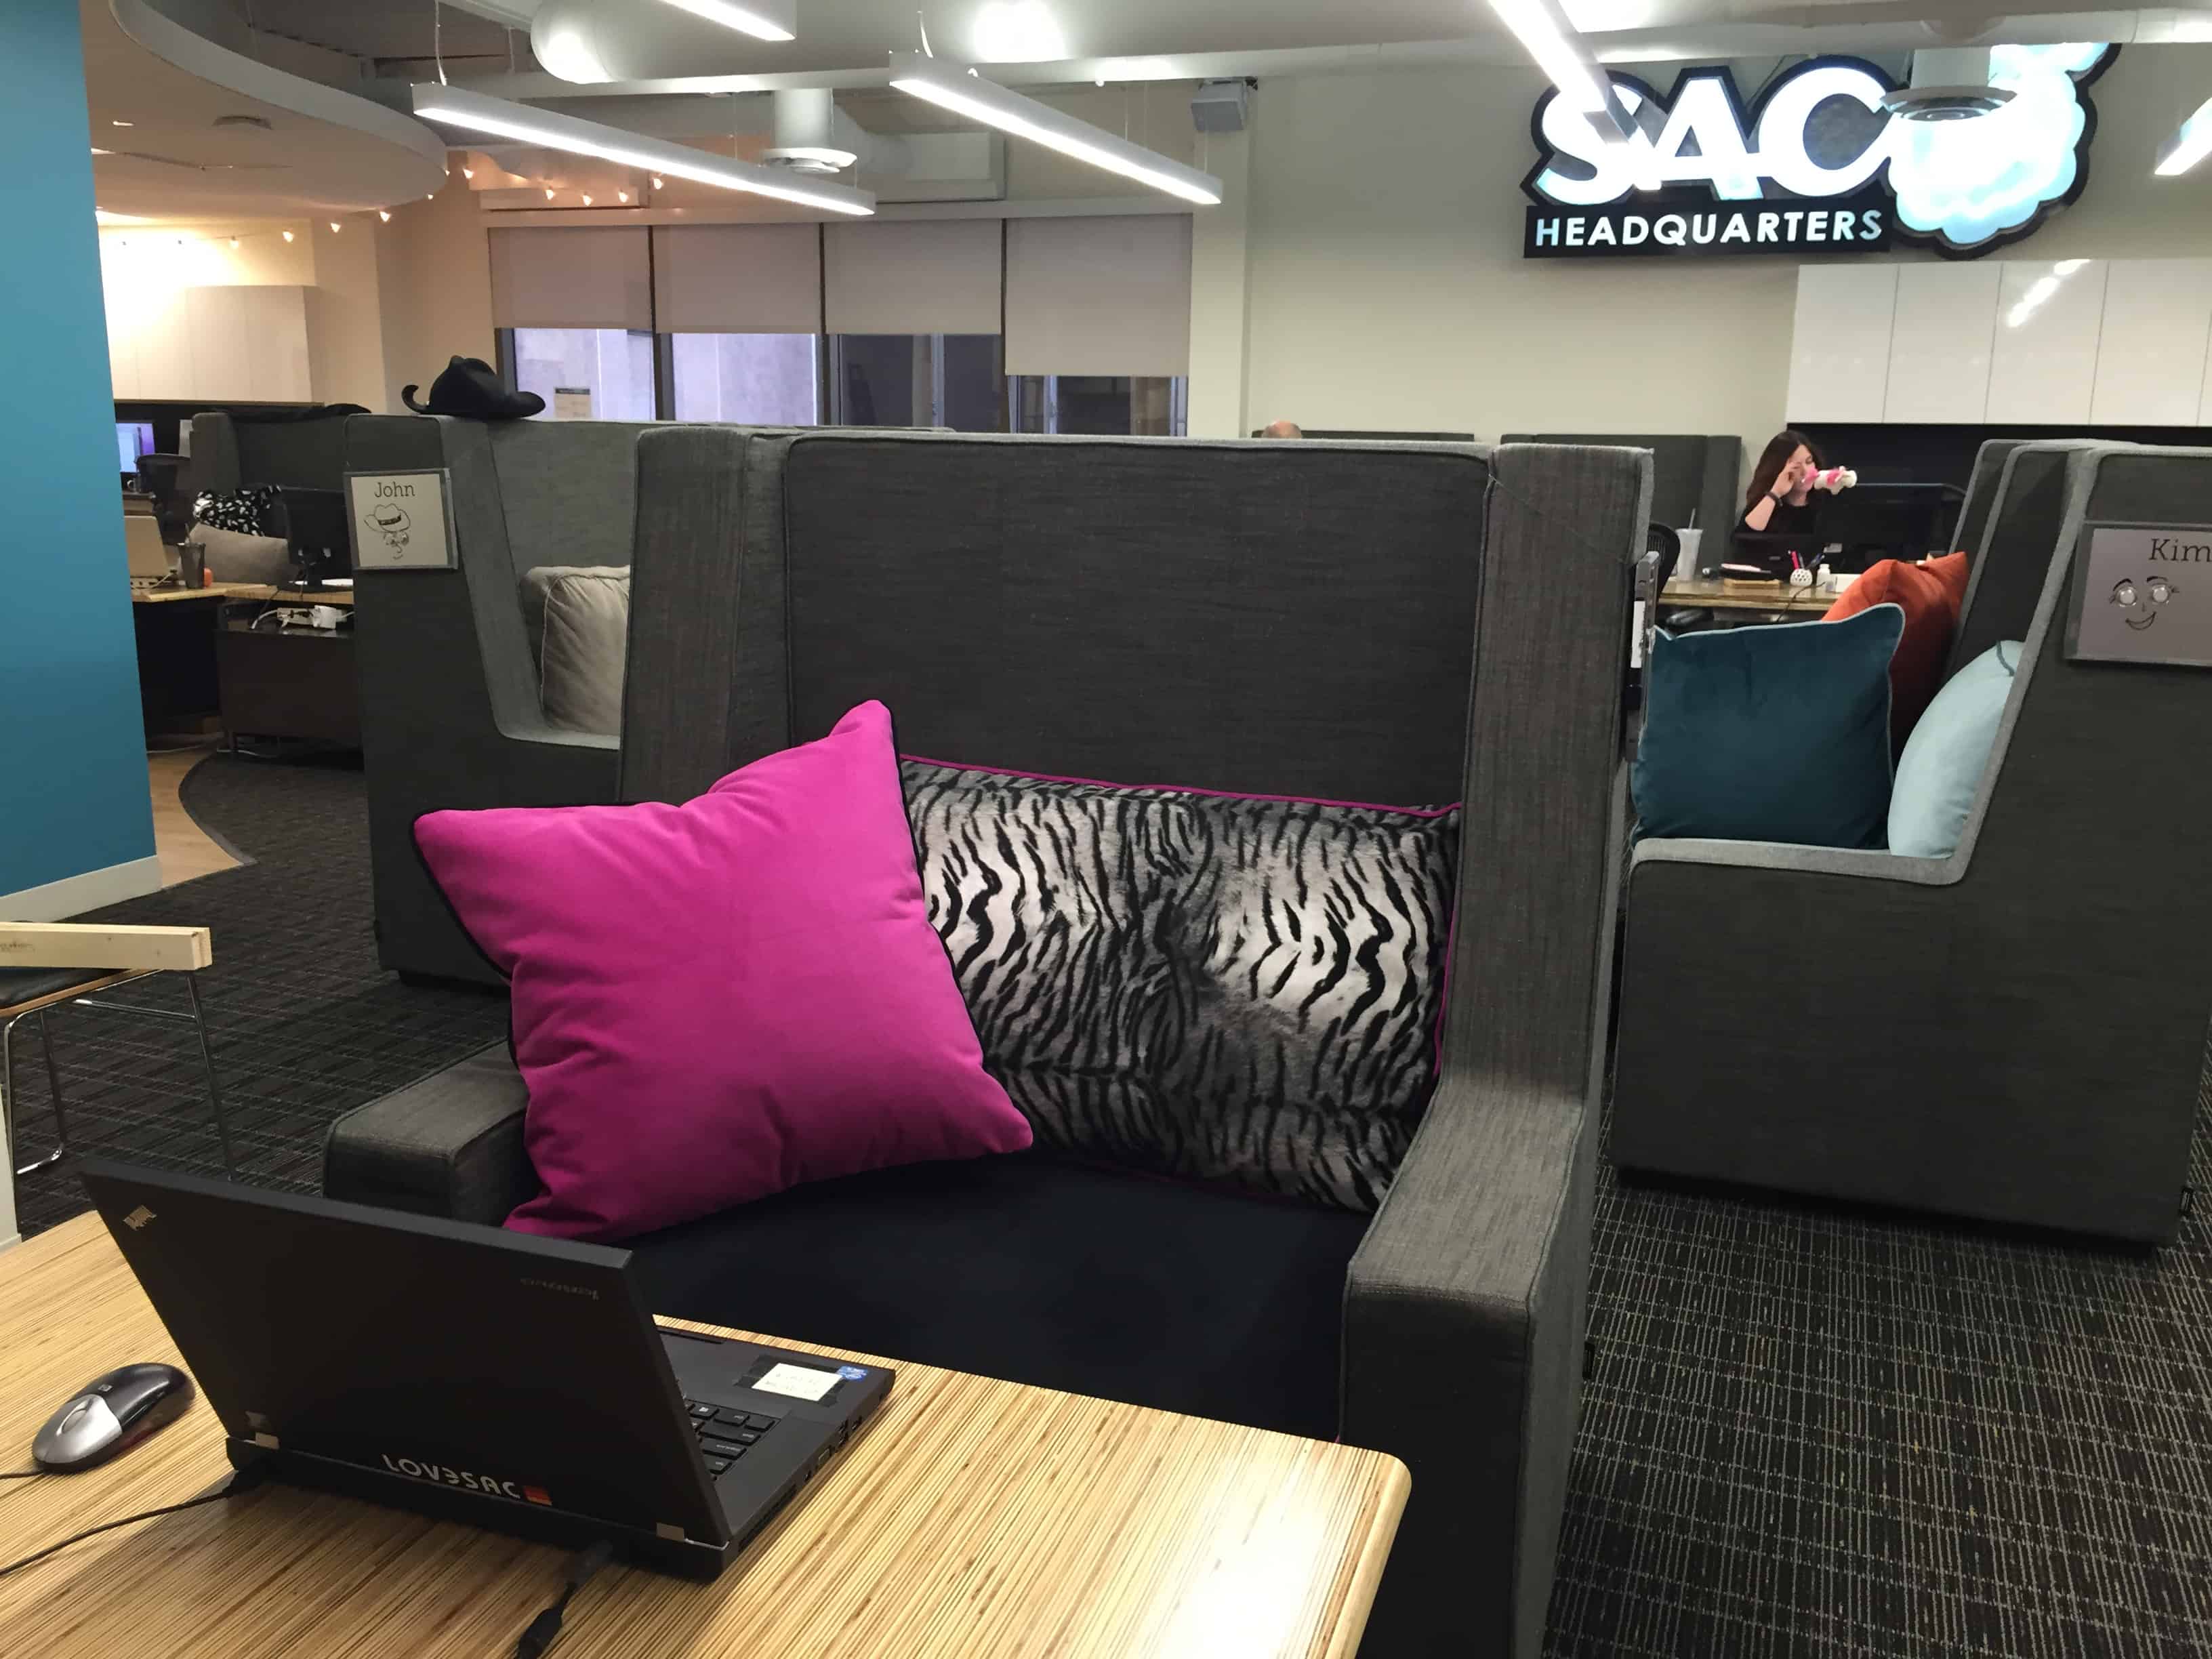 Sactionals workstation by Lovesac